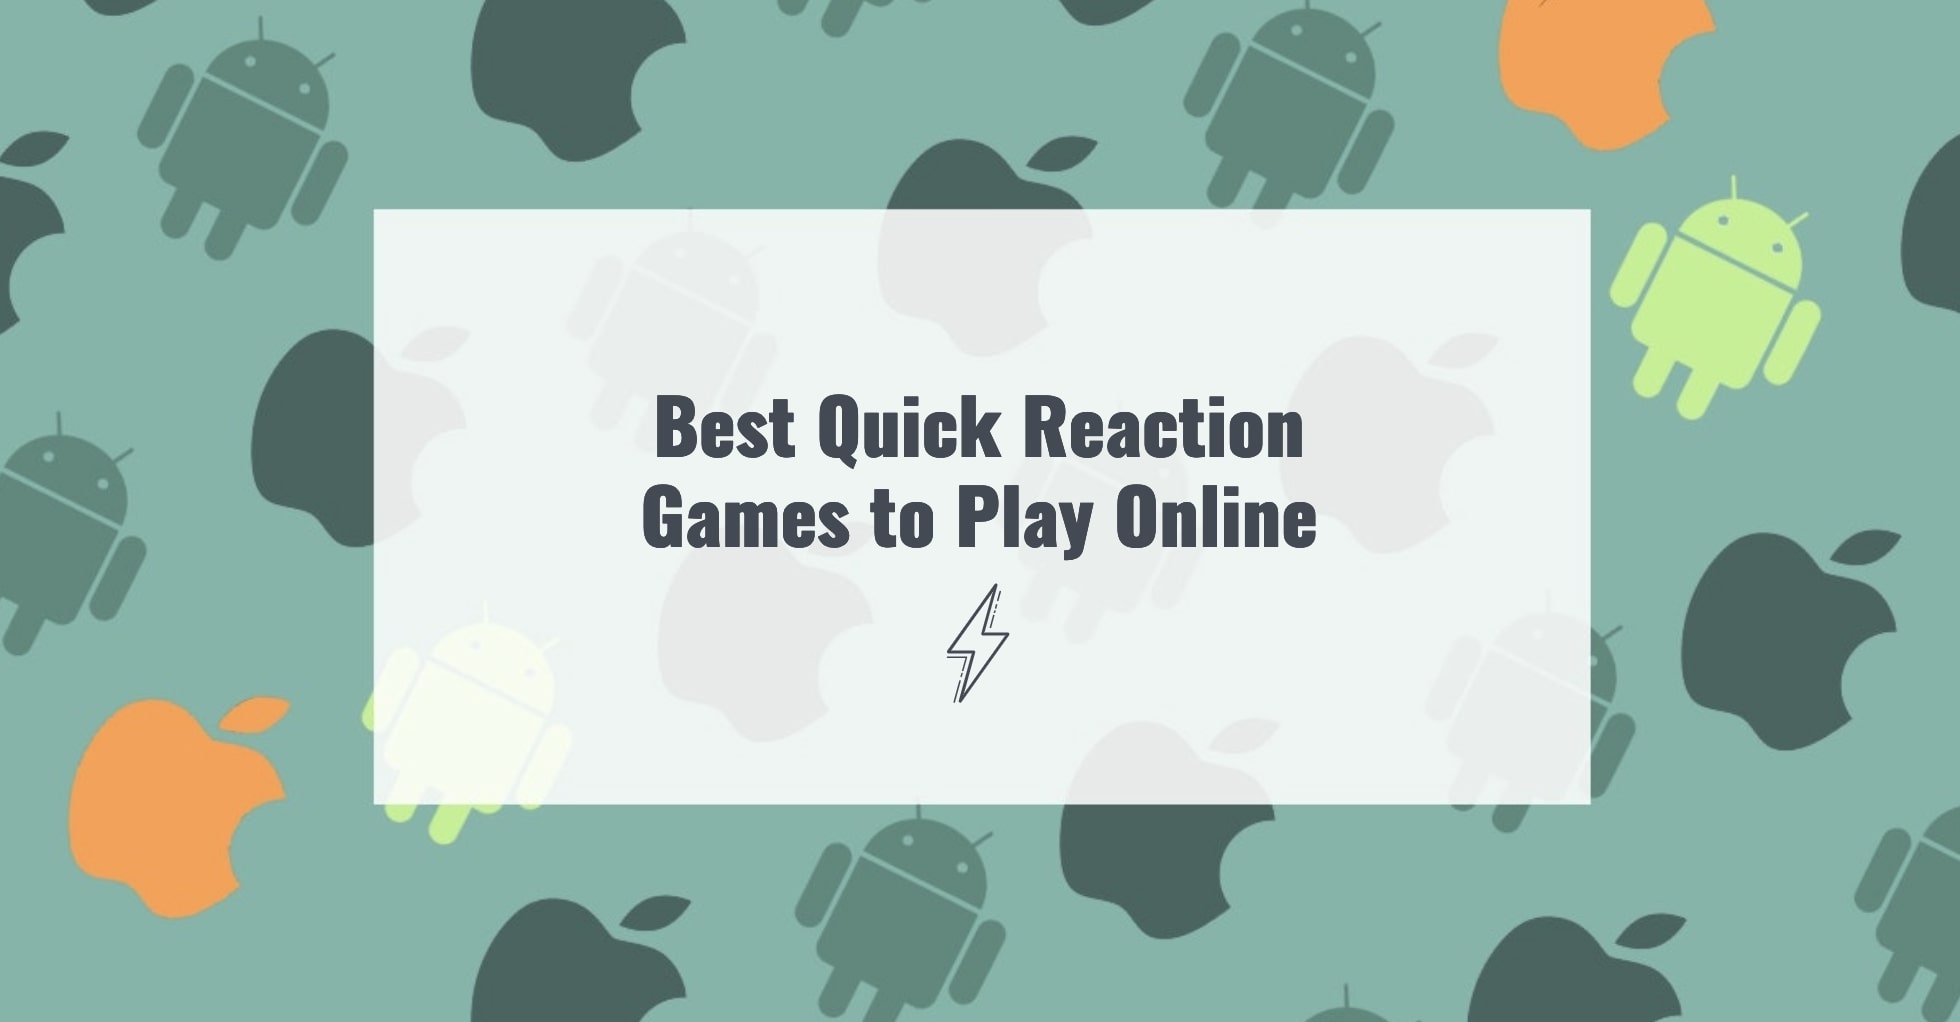 Best Quick Reaction Games to Play Online